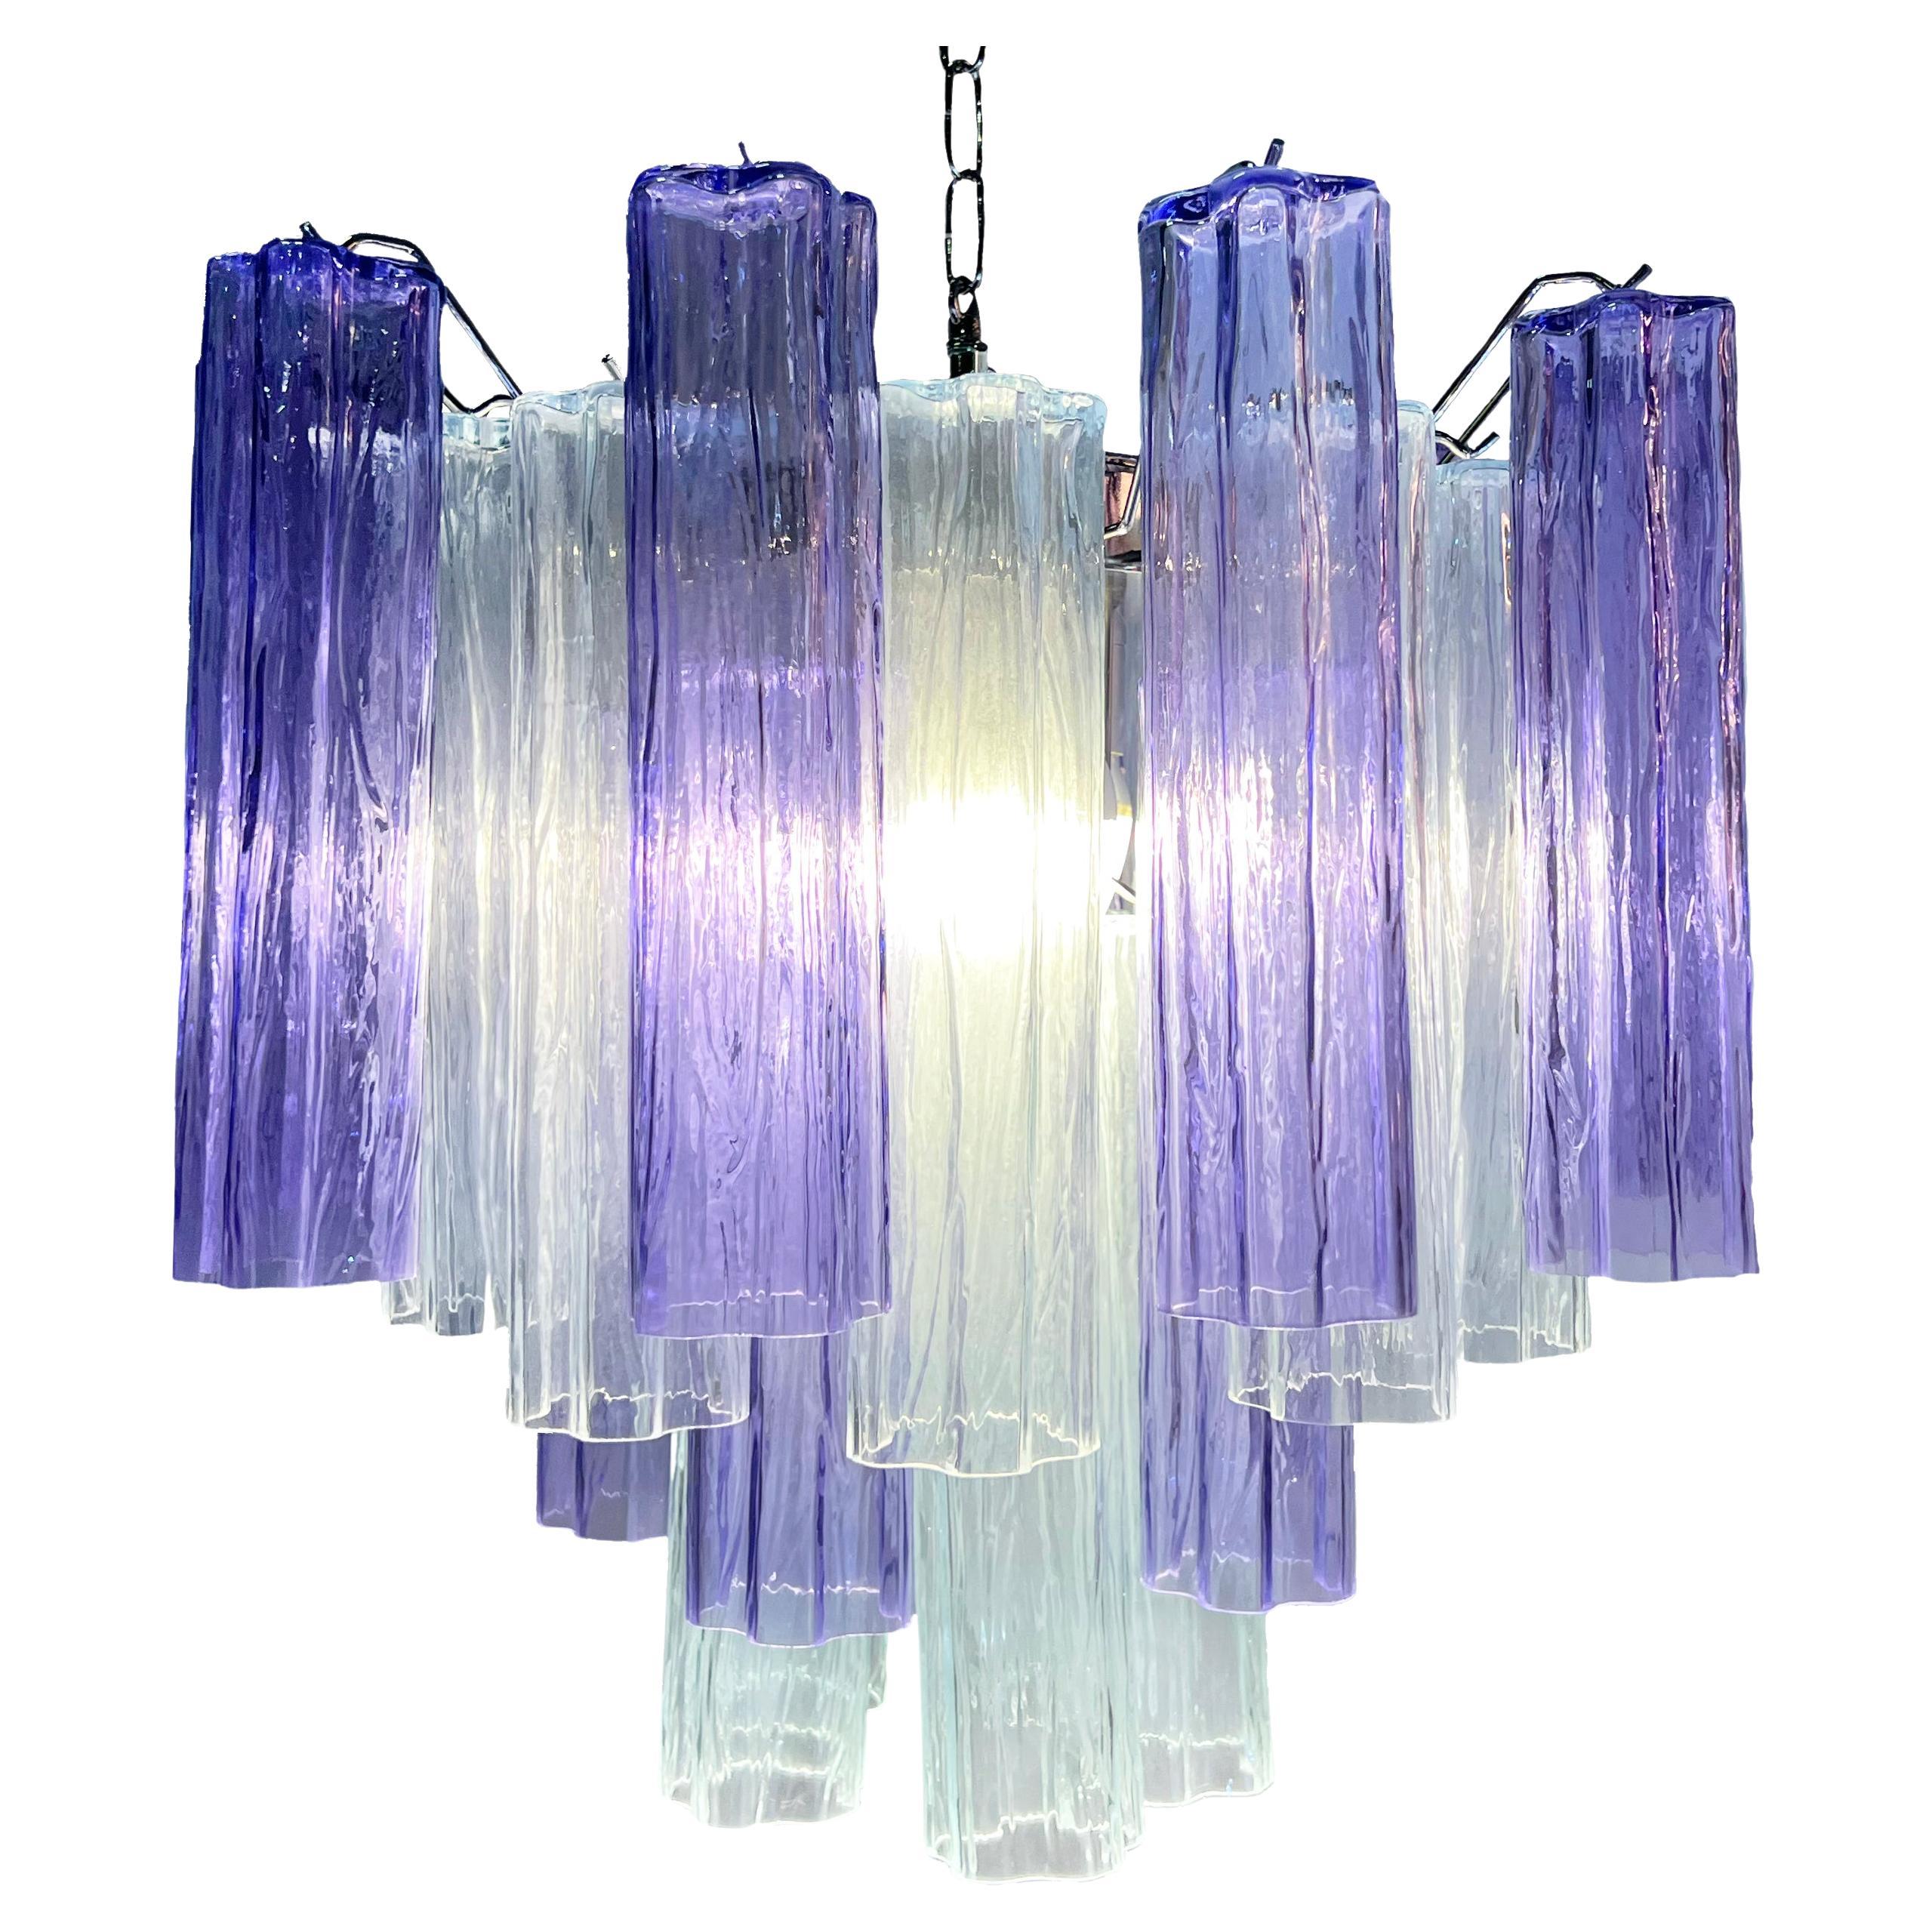 Fascinating Murano chandeliers. It is composed of 30 star shaped panes of pure Murano glass. The height is adjustable according to the height of the ceiling. At no extra cost we will replace the original lamp holders with those in use in the USA.